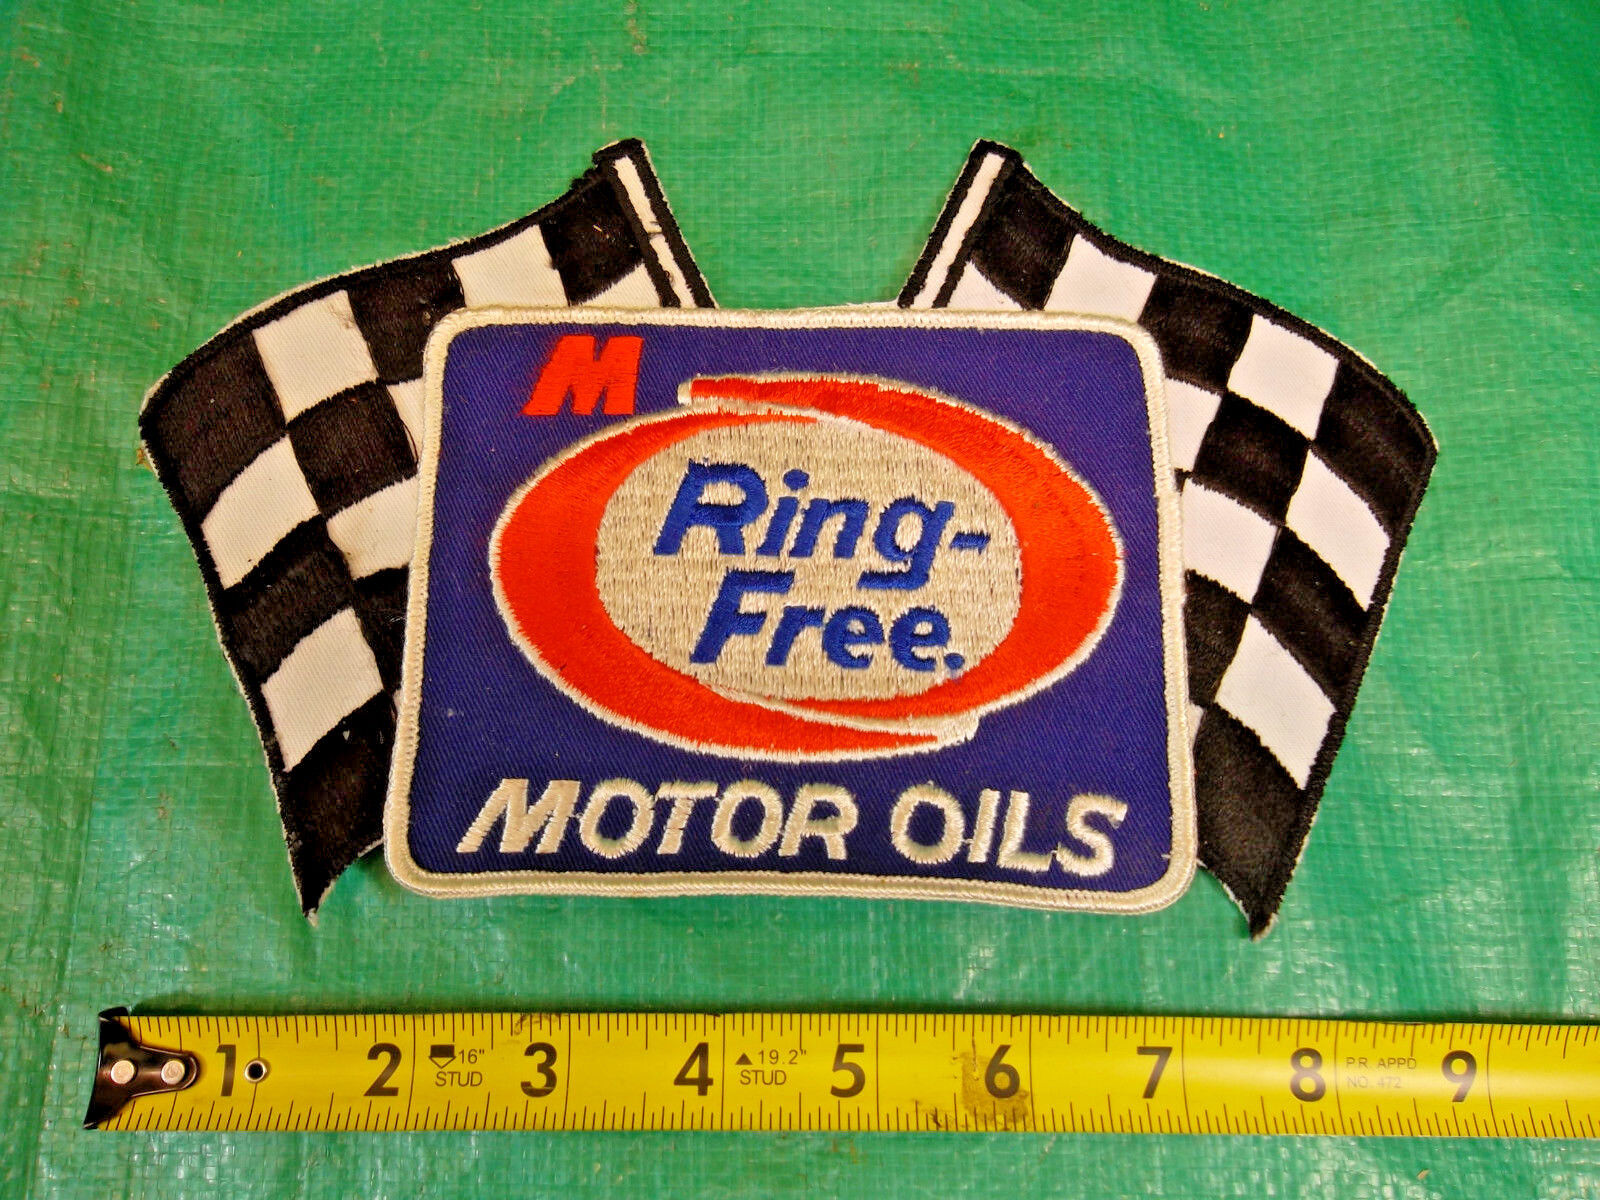 Large Vintage MacMillan Ring-Free Motor Oils Embroidered Checkered Flag Patch